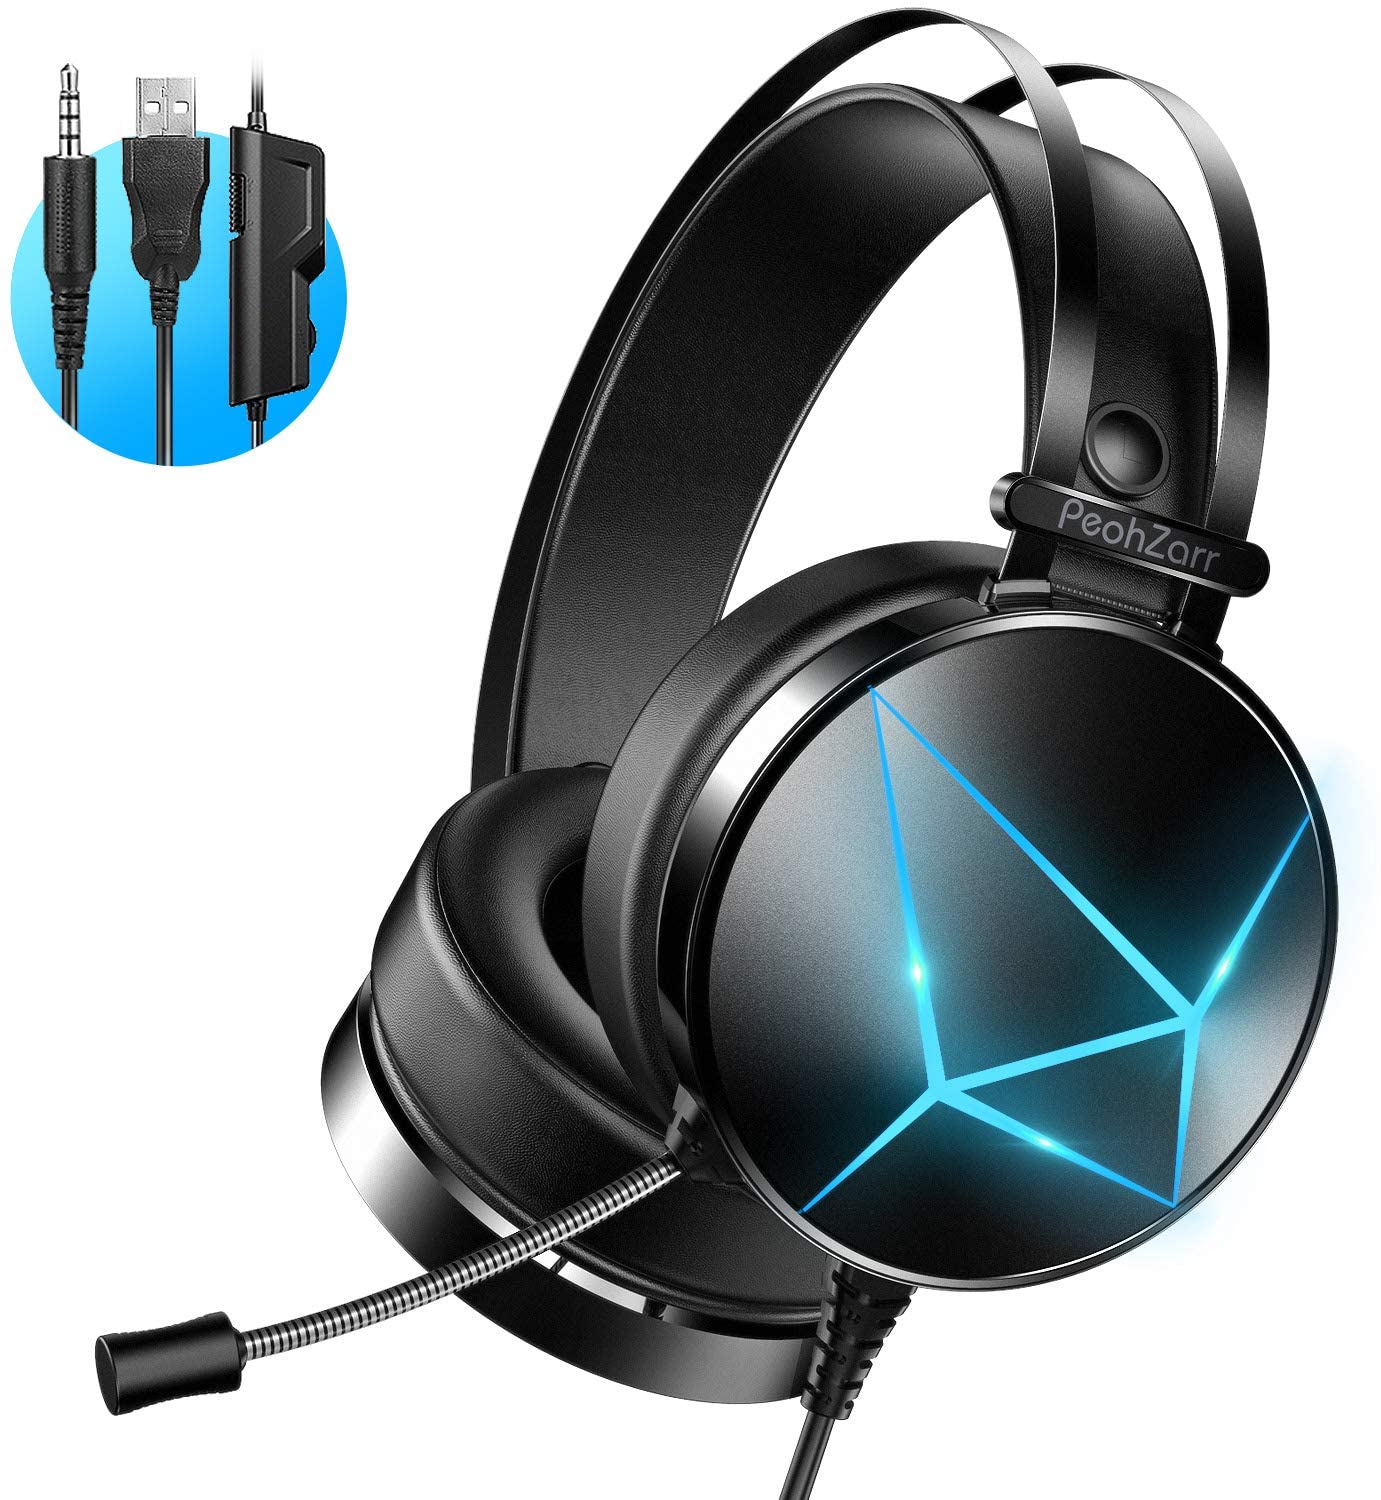 PeohZarr 7.1 Surround Sound PS4 Gaming Headset & Mic